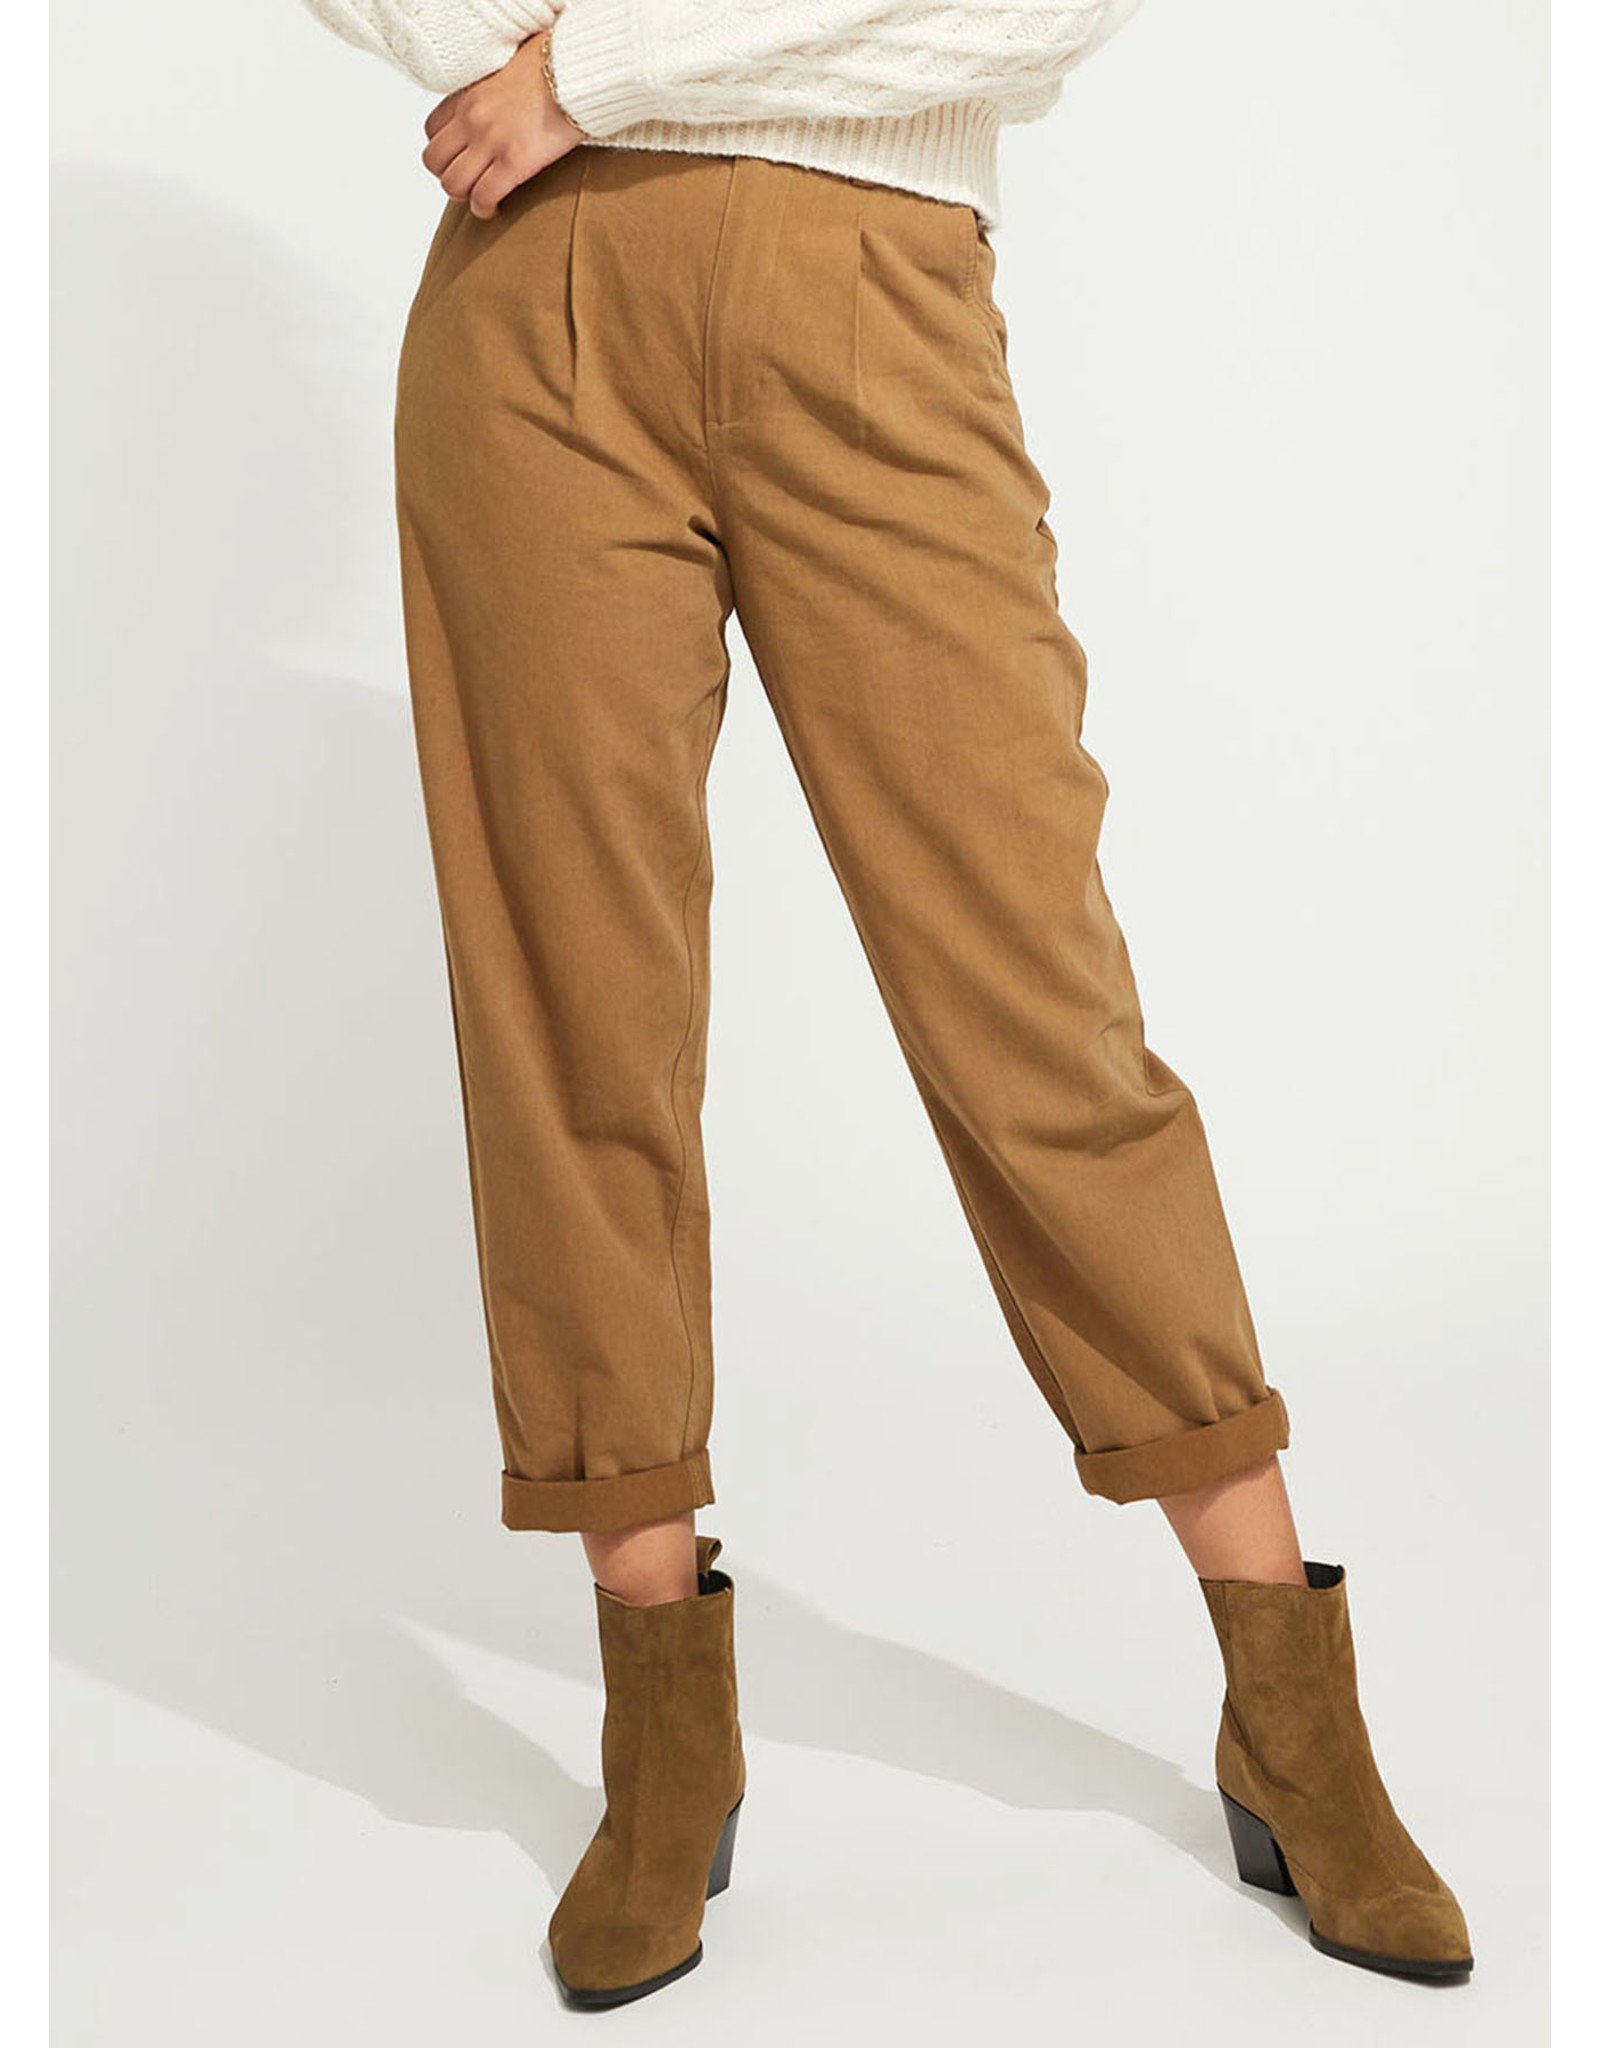 Gentle Fawn - Manchester Pant Black or Brown